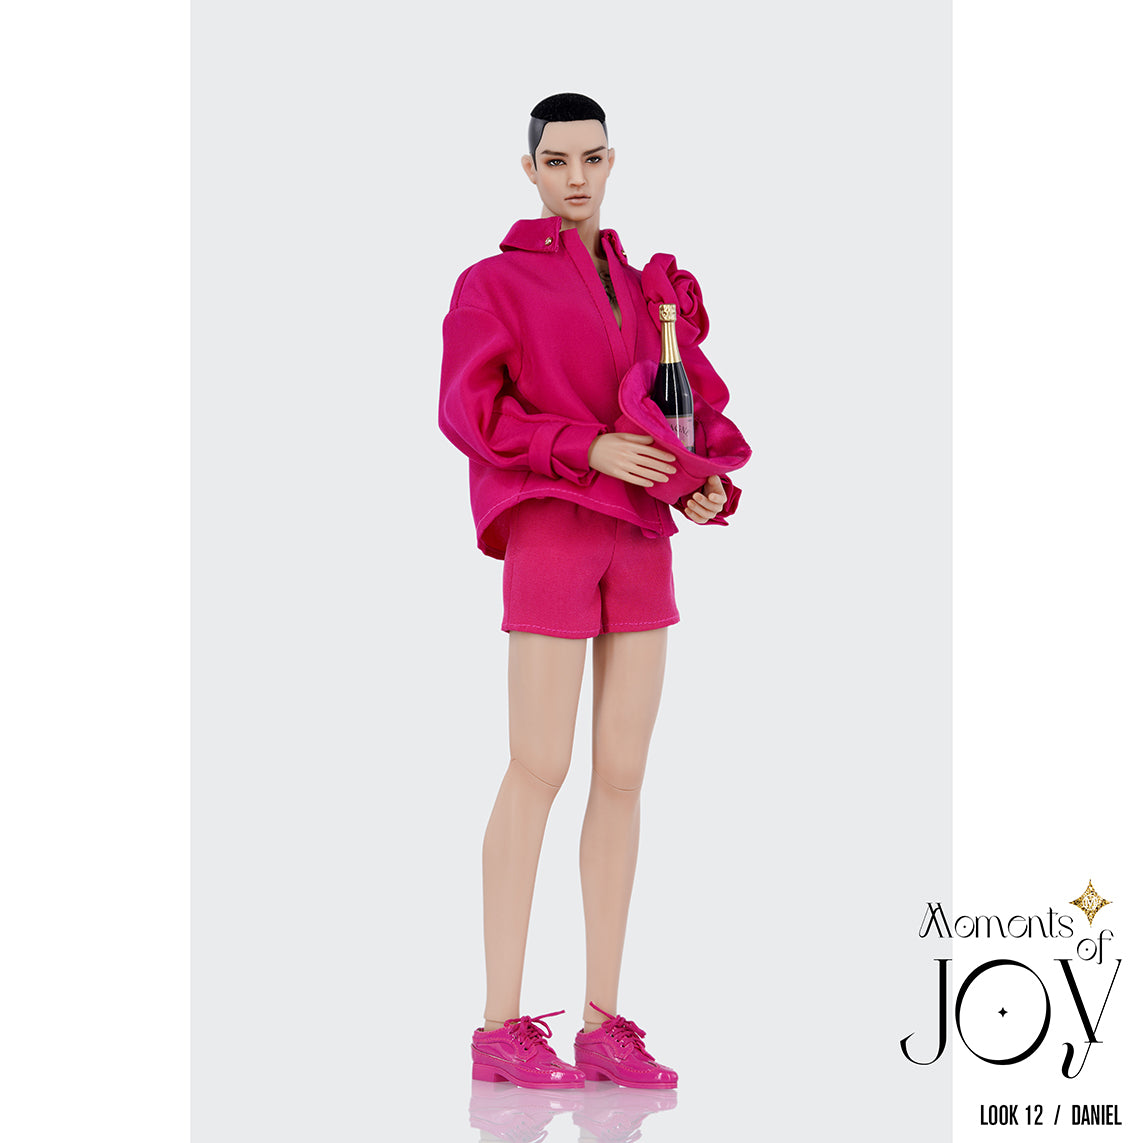 Muses Moments of Joy Men's Fashion Look 12